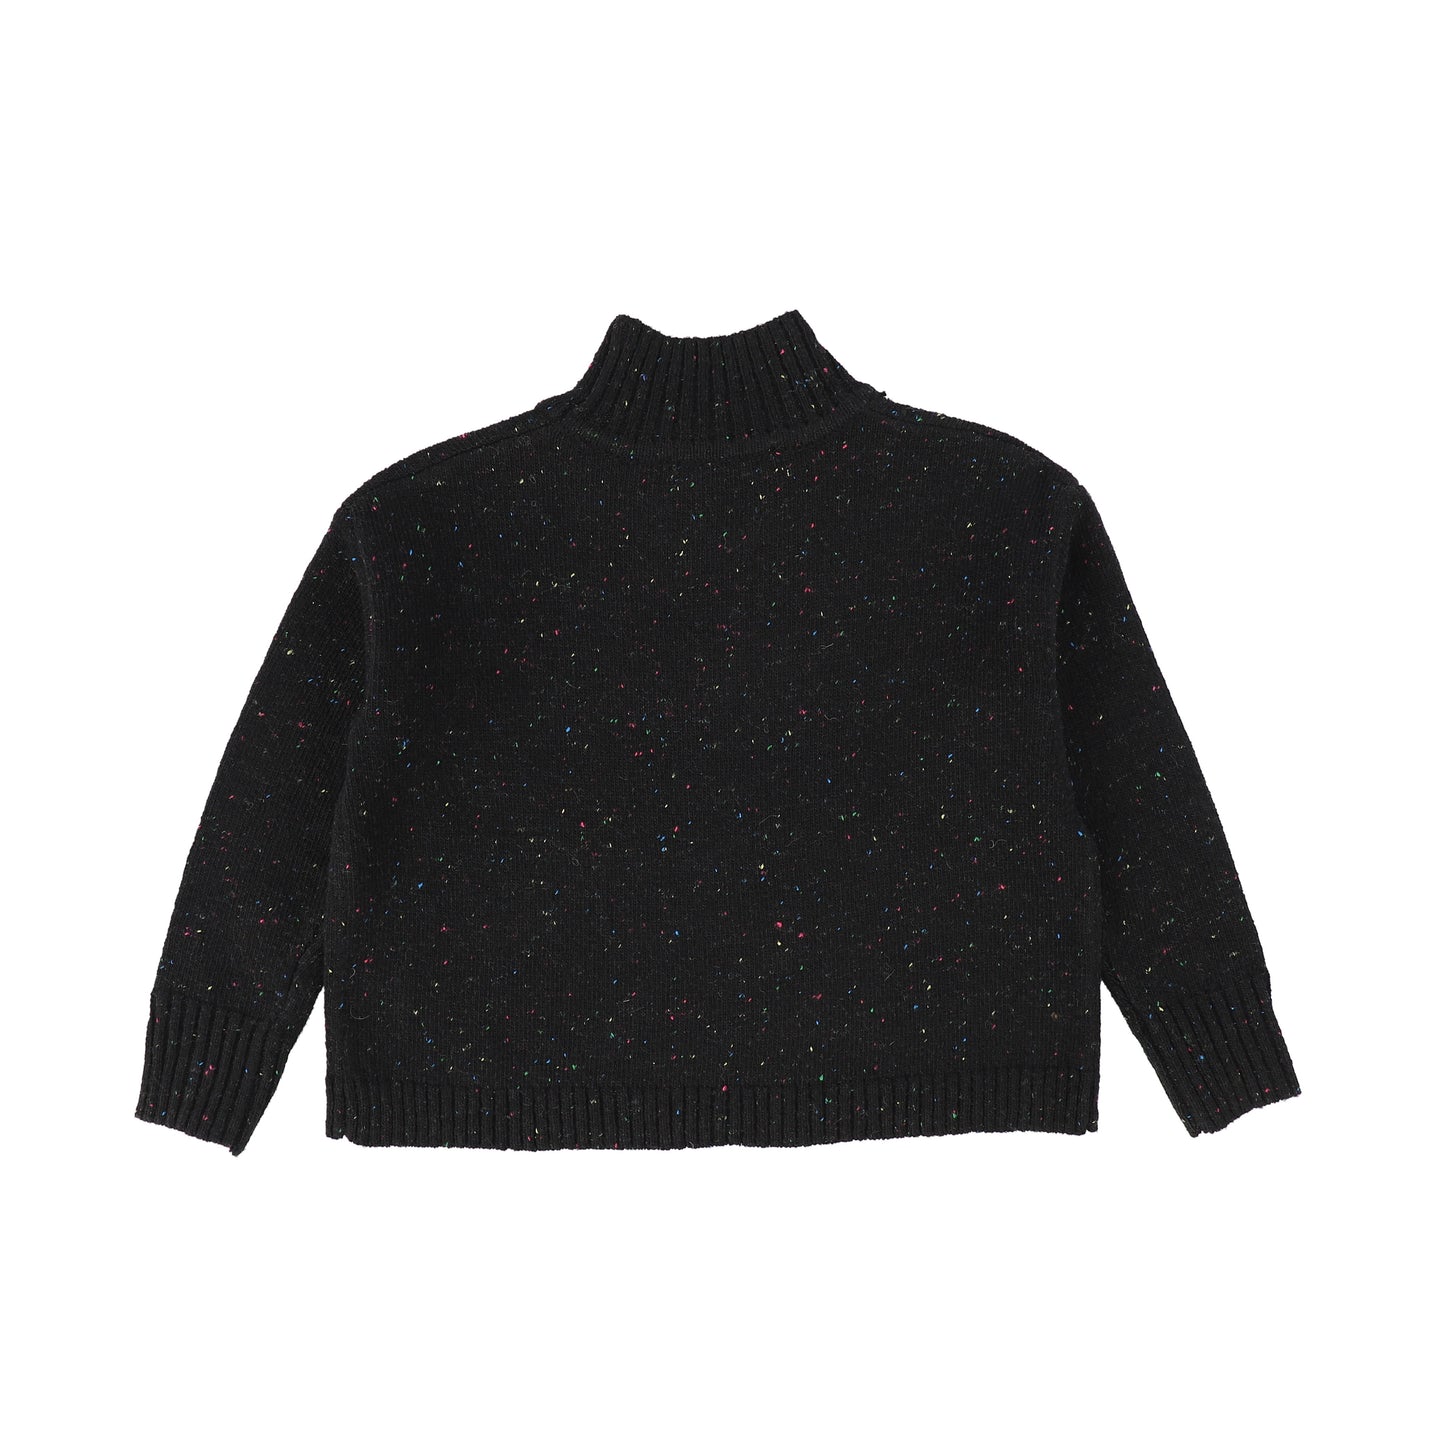 ONE CHILD BLACK SPECKLED SWEATER [Final Sale]